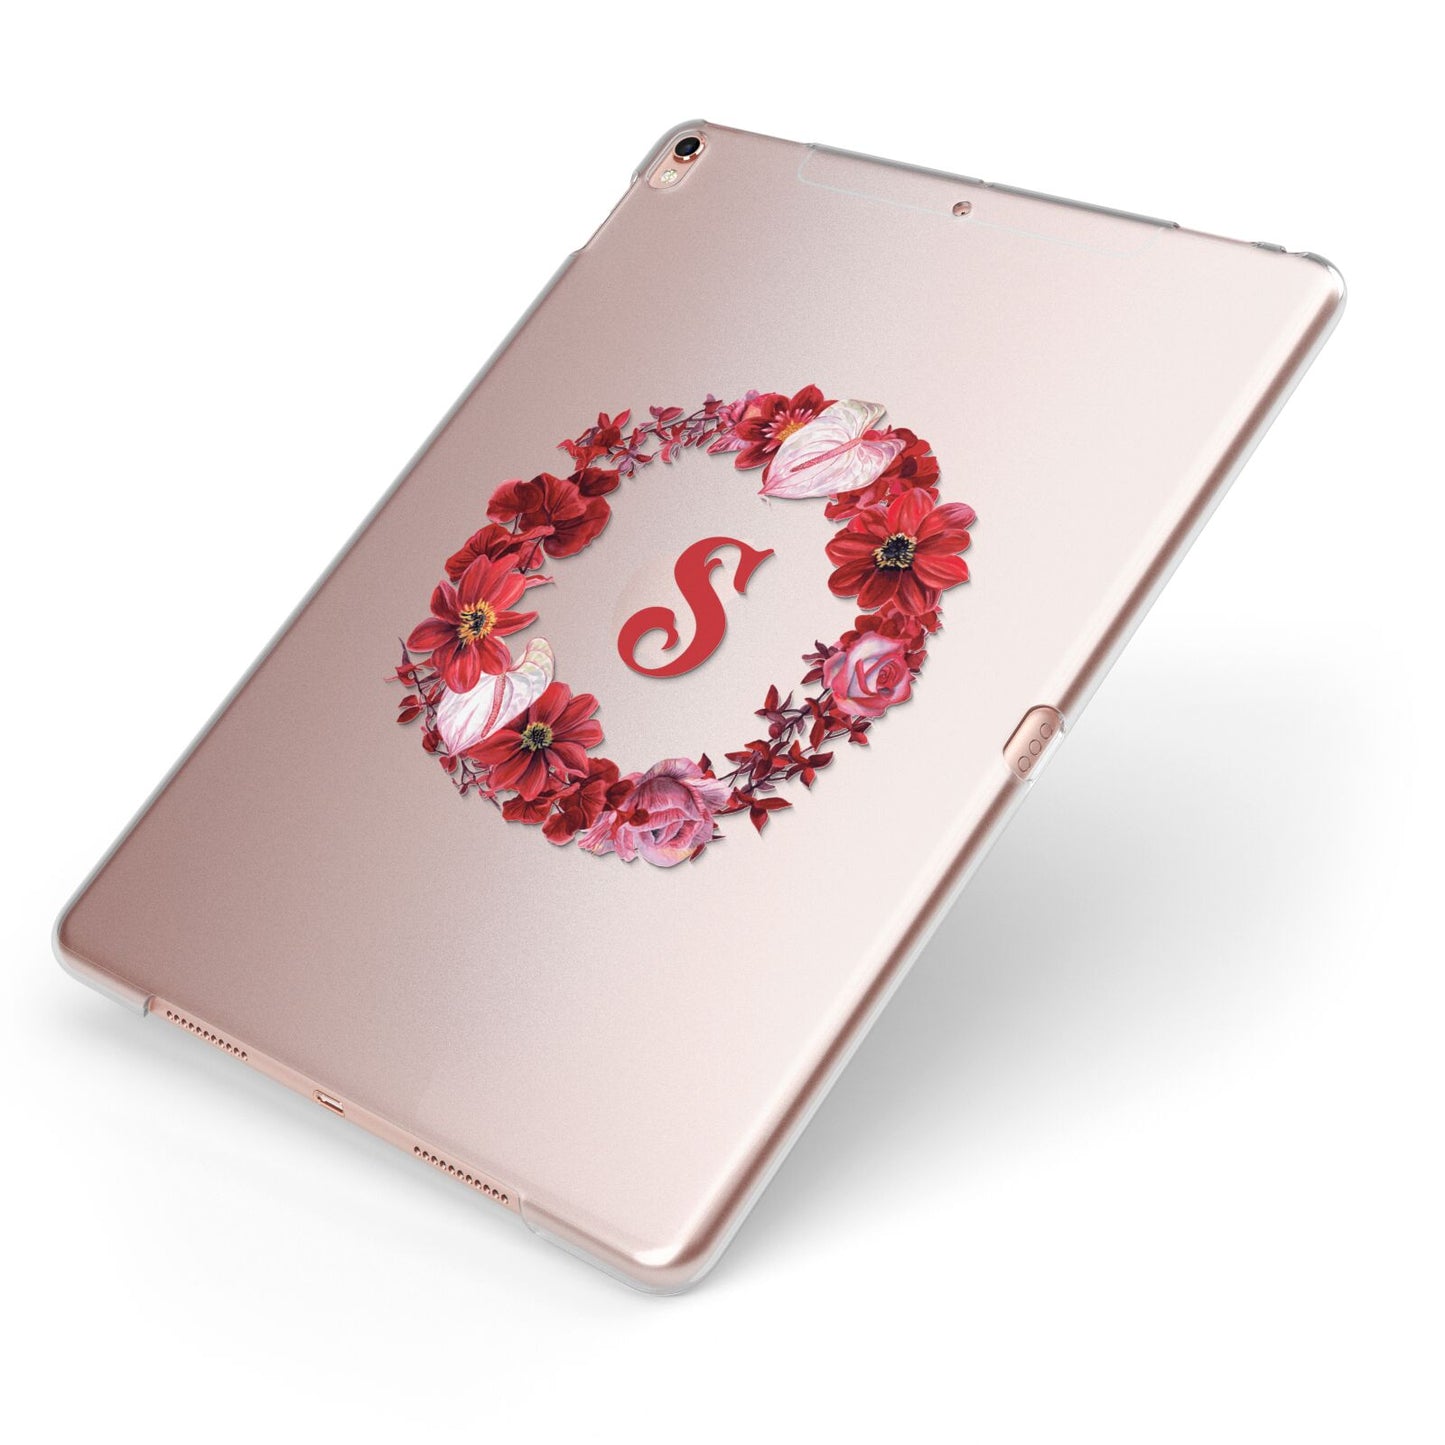 Personalised Initial Floral Wreath Apple iPad Case on Rose Gold iPad Side View